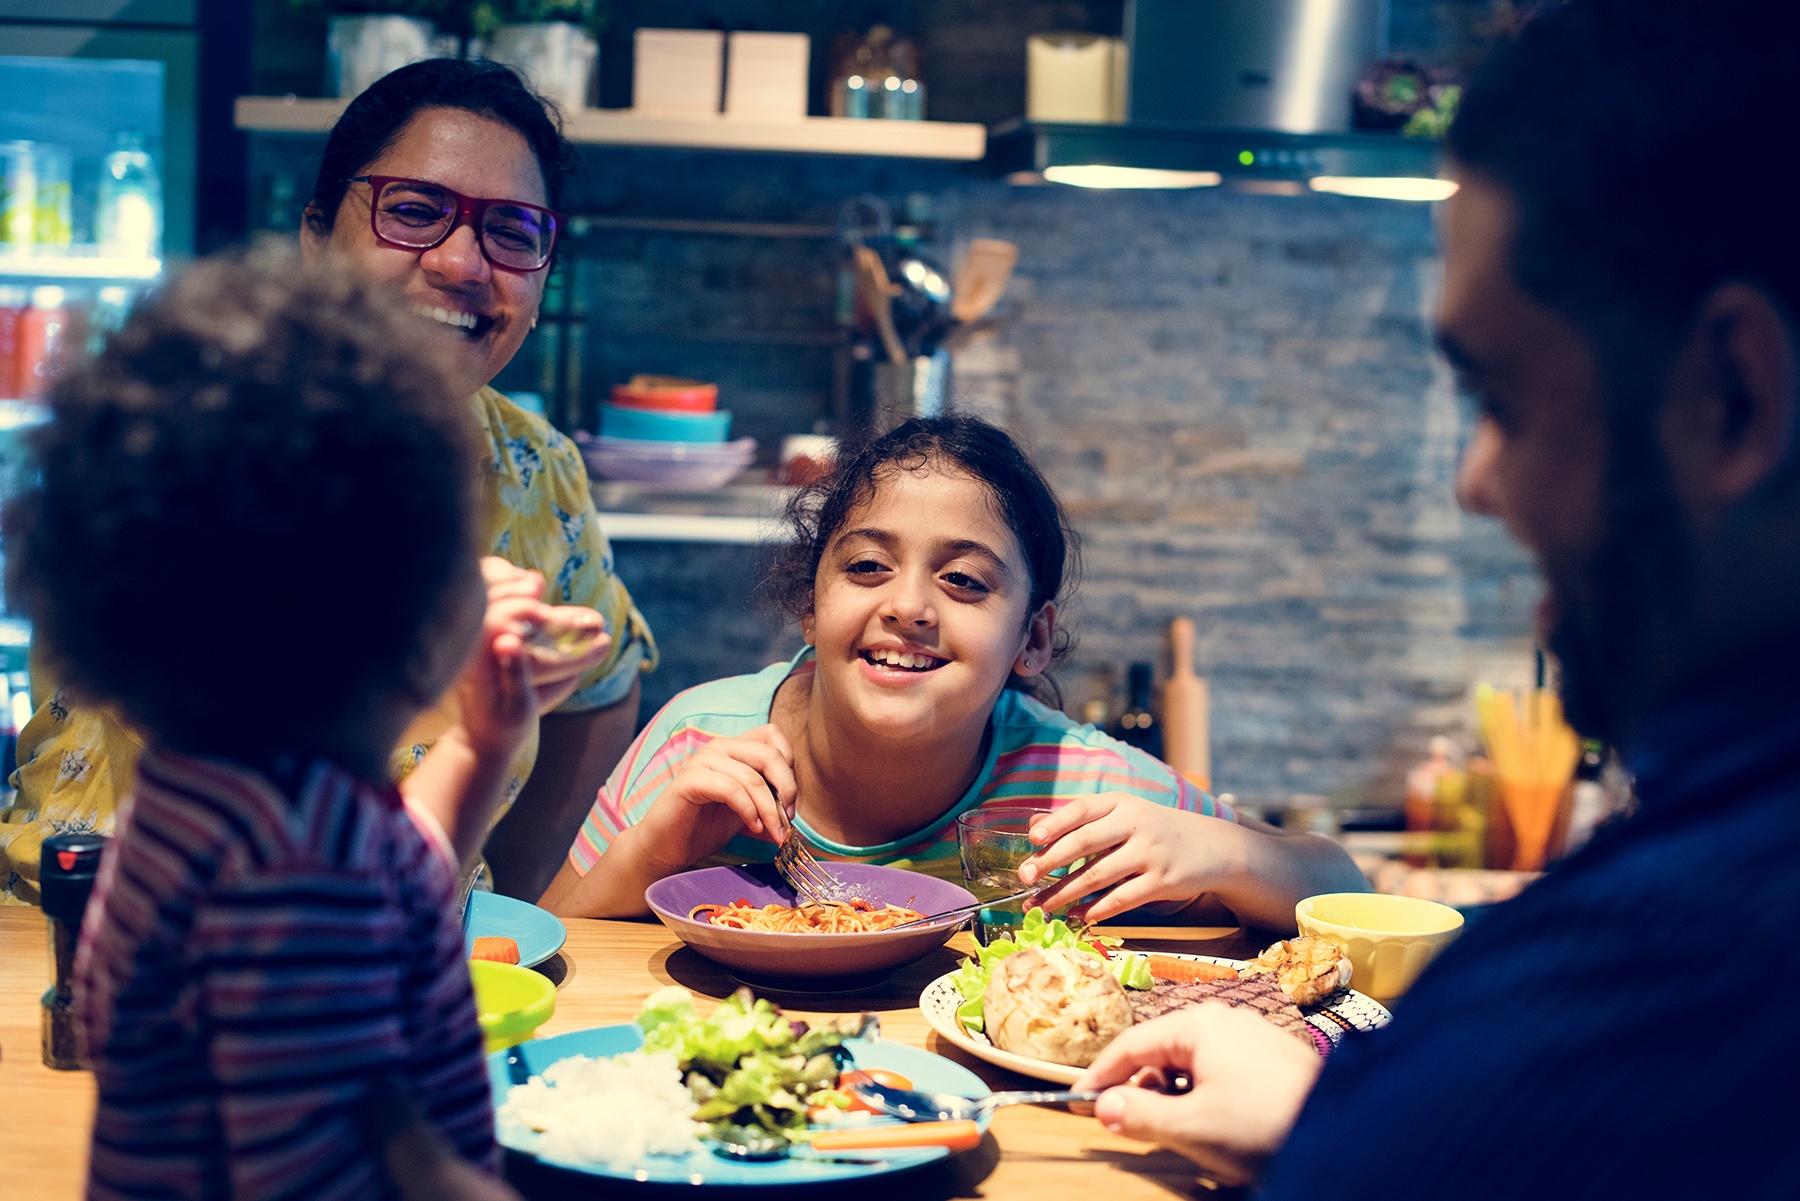 Meals strengthen families: Why eating together matters